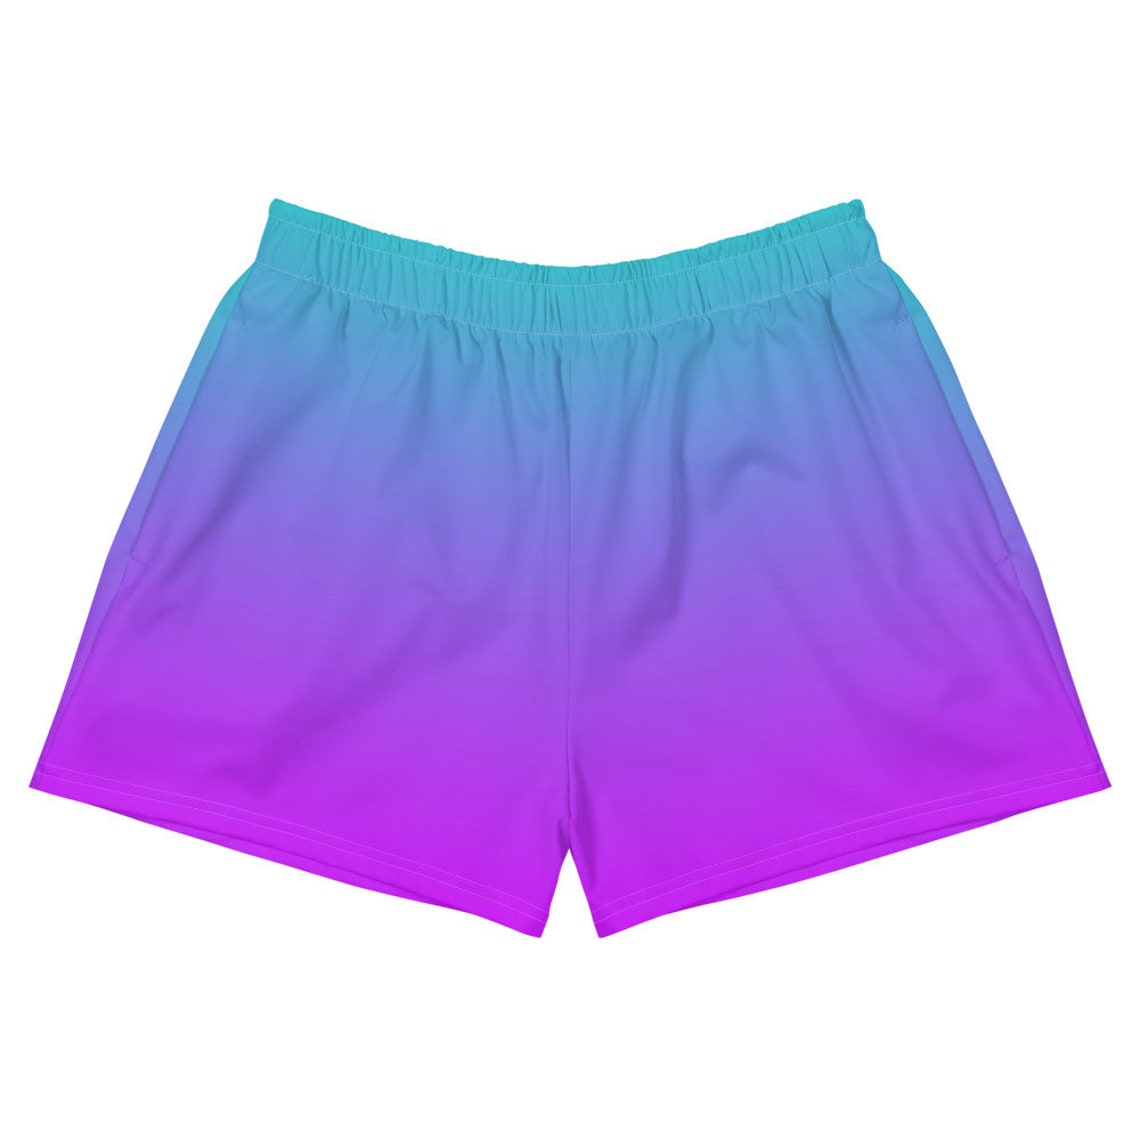 Purple Ombre Gradient Athletic Shorts With Pockets Vaporwave | Etsy